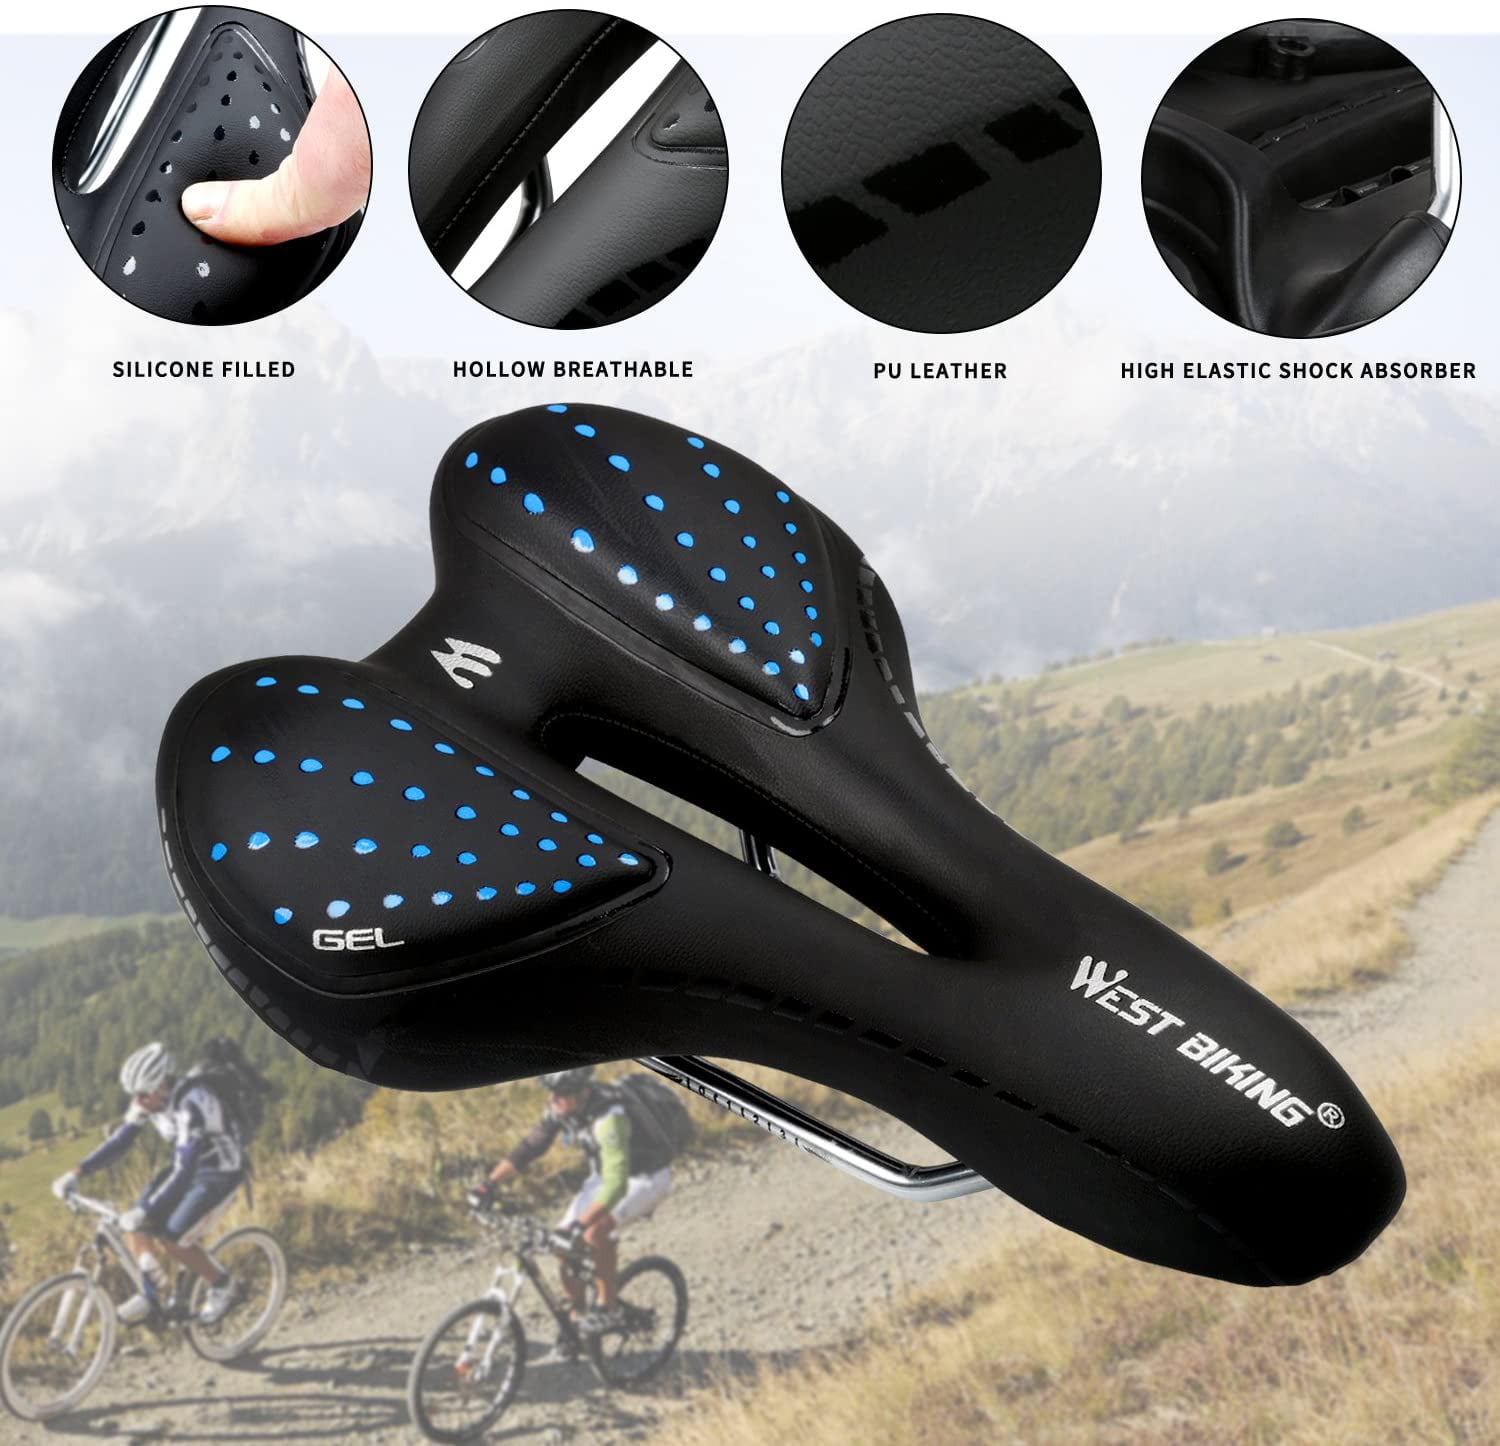 Extra Comfort Soft Bicycle Cushion with Breathable Design for Men Women Road Cycling Seat Ultralight Non-Slip Water-Resistant Bike Saddle Green-1 